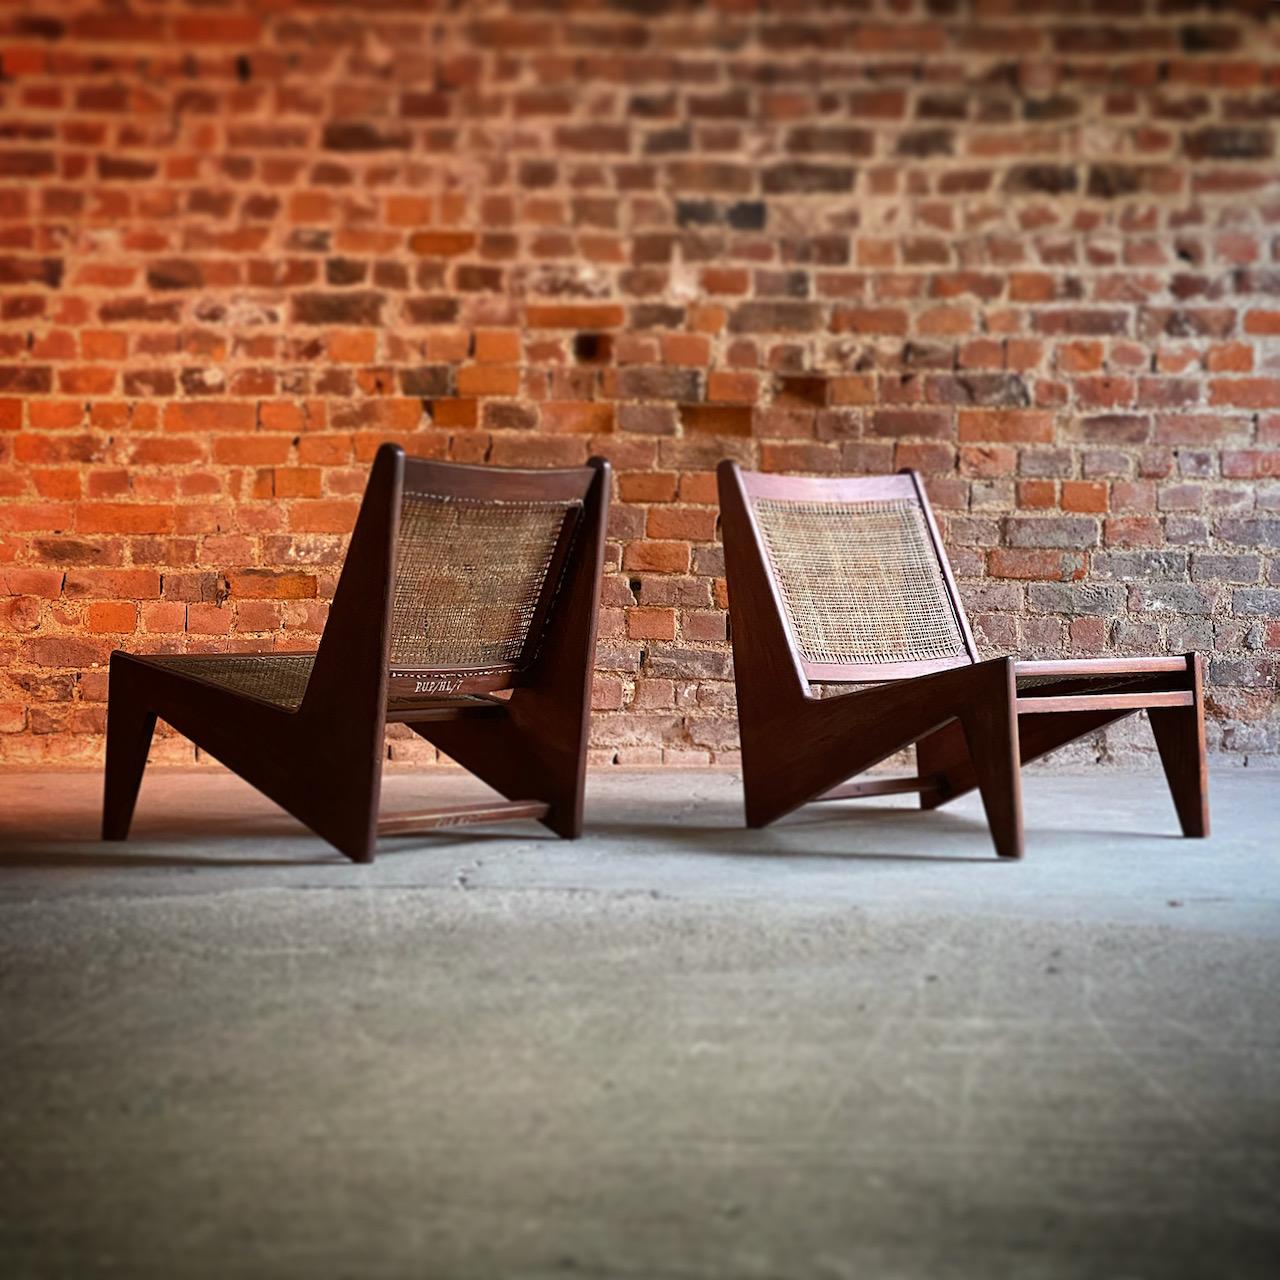 Pierre Jeanneret Model: CH010607 Kangourou Low Chairs Teak & Cane Chandigarh 

Rare pair of Pierre Jeanneret Model: CH010607 Low chairs also known as the “Kangourou